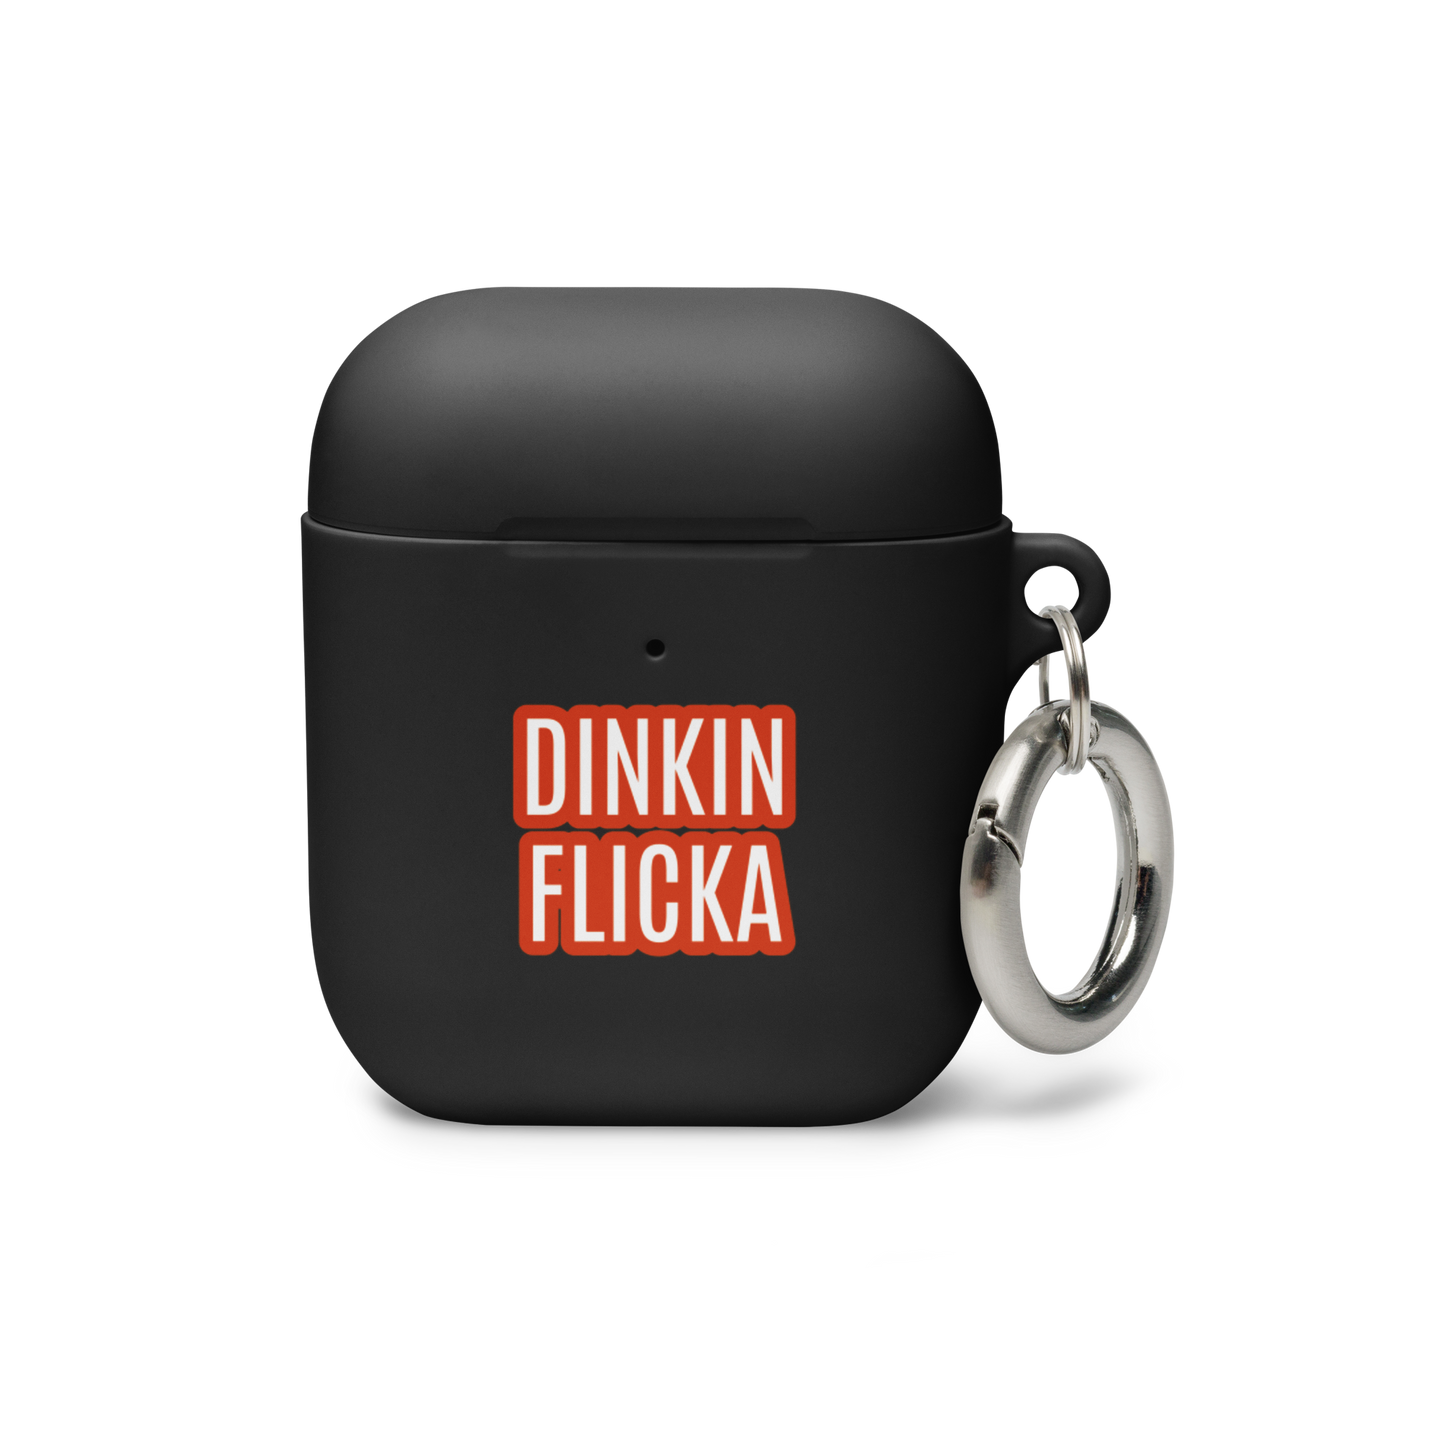 Dinkin Flicka Rubber Case for AirPods®